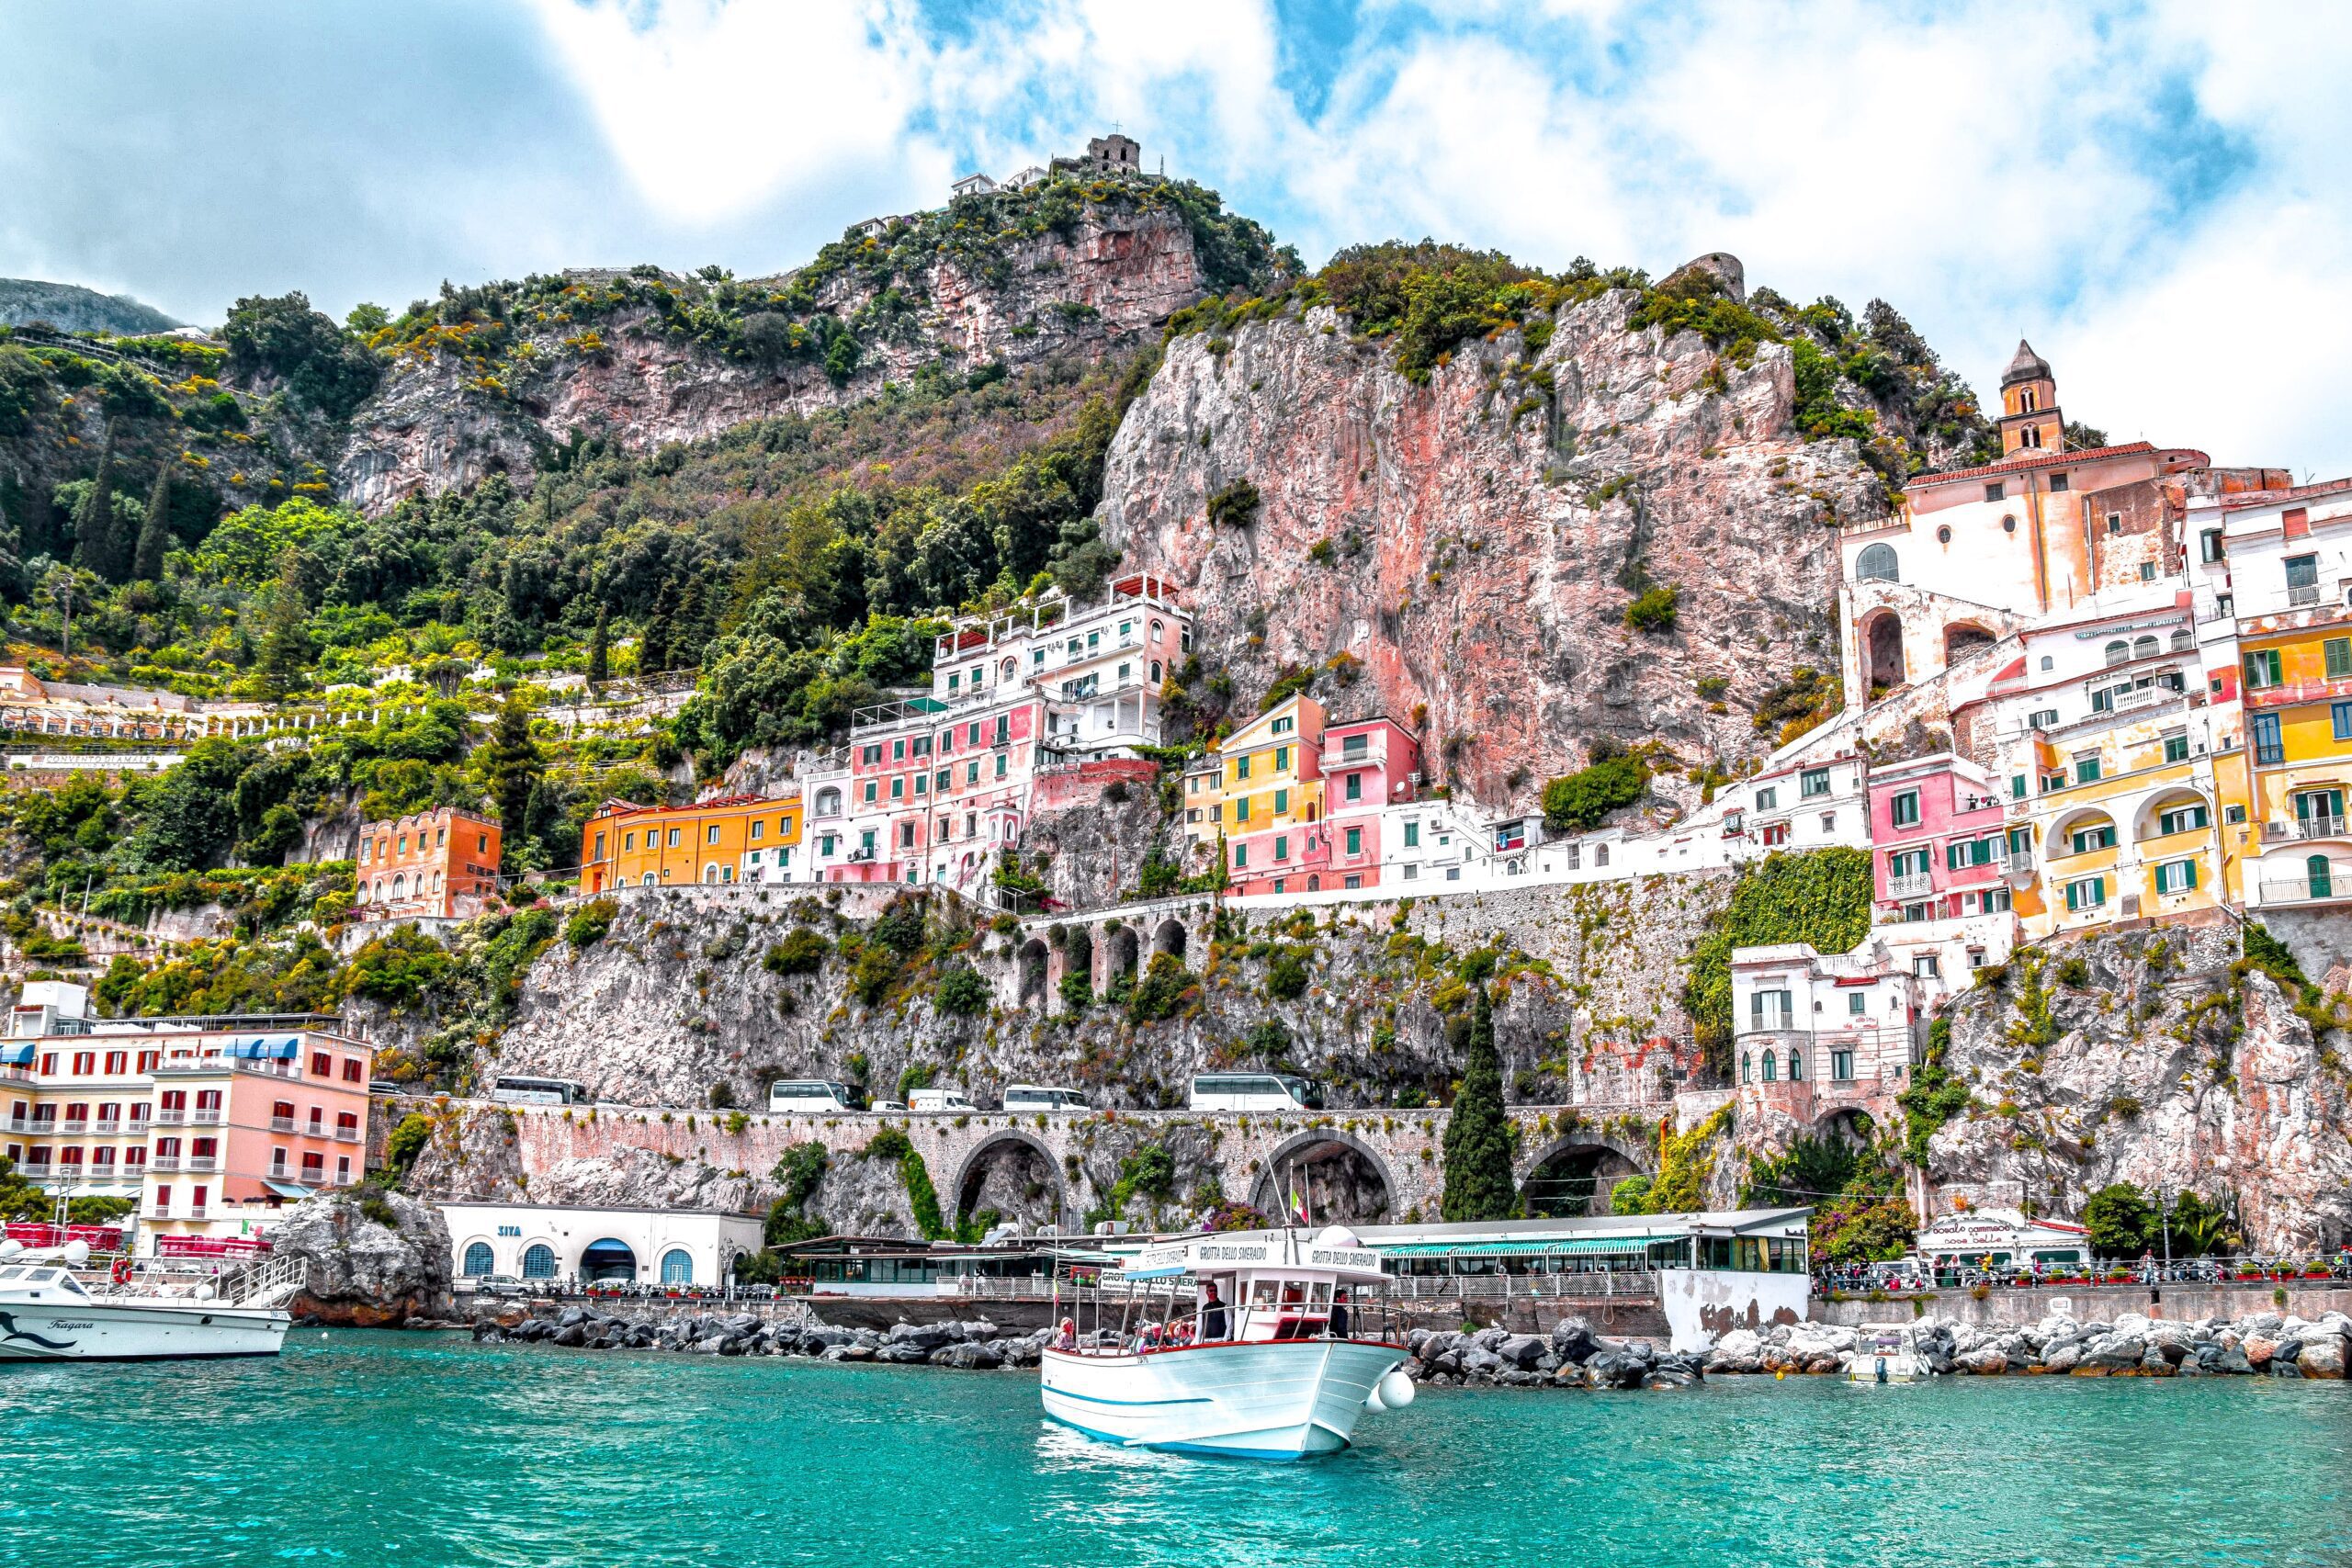 ✈ How to get from Naples Amalfi